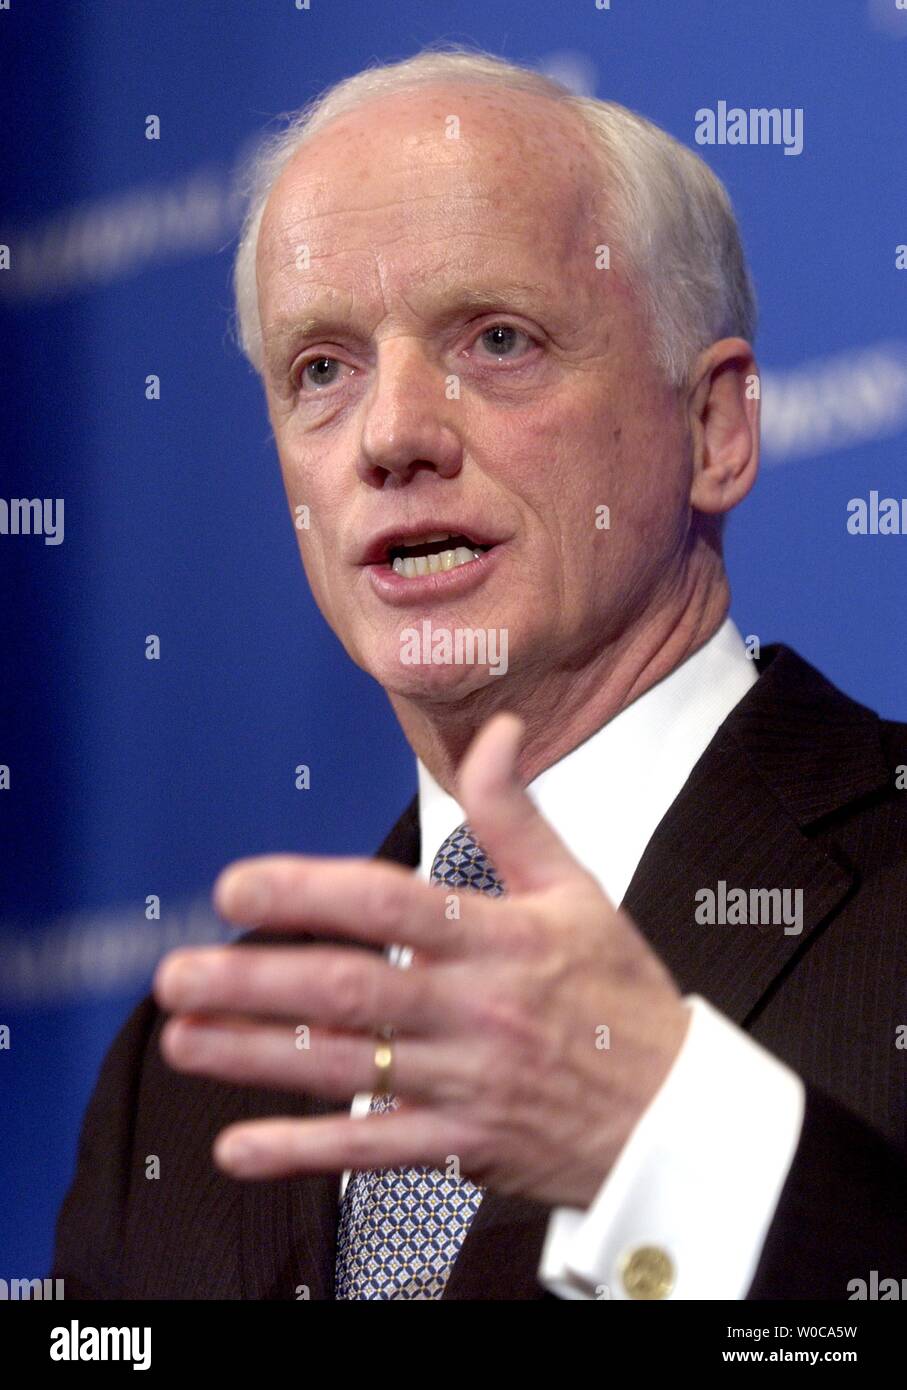 Former Governor Frank Keating, who is now the President and CEO of the American Council of the Life Insurers speaks at the National Press Club on January 20, 2004 in Washington.  Keating discussed the impending problems of America's baby boomers who are not saving enough, and the ramifications that will have on the country. (UPI Photo/Michael Kleinfeld) Stock Photo